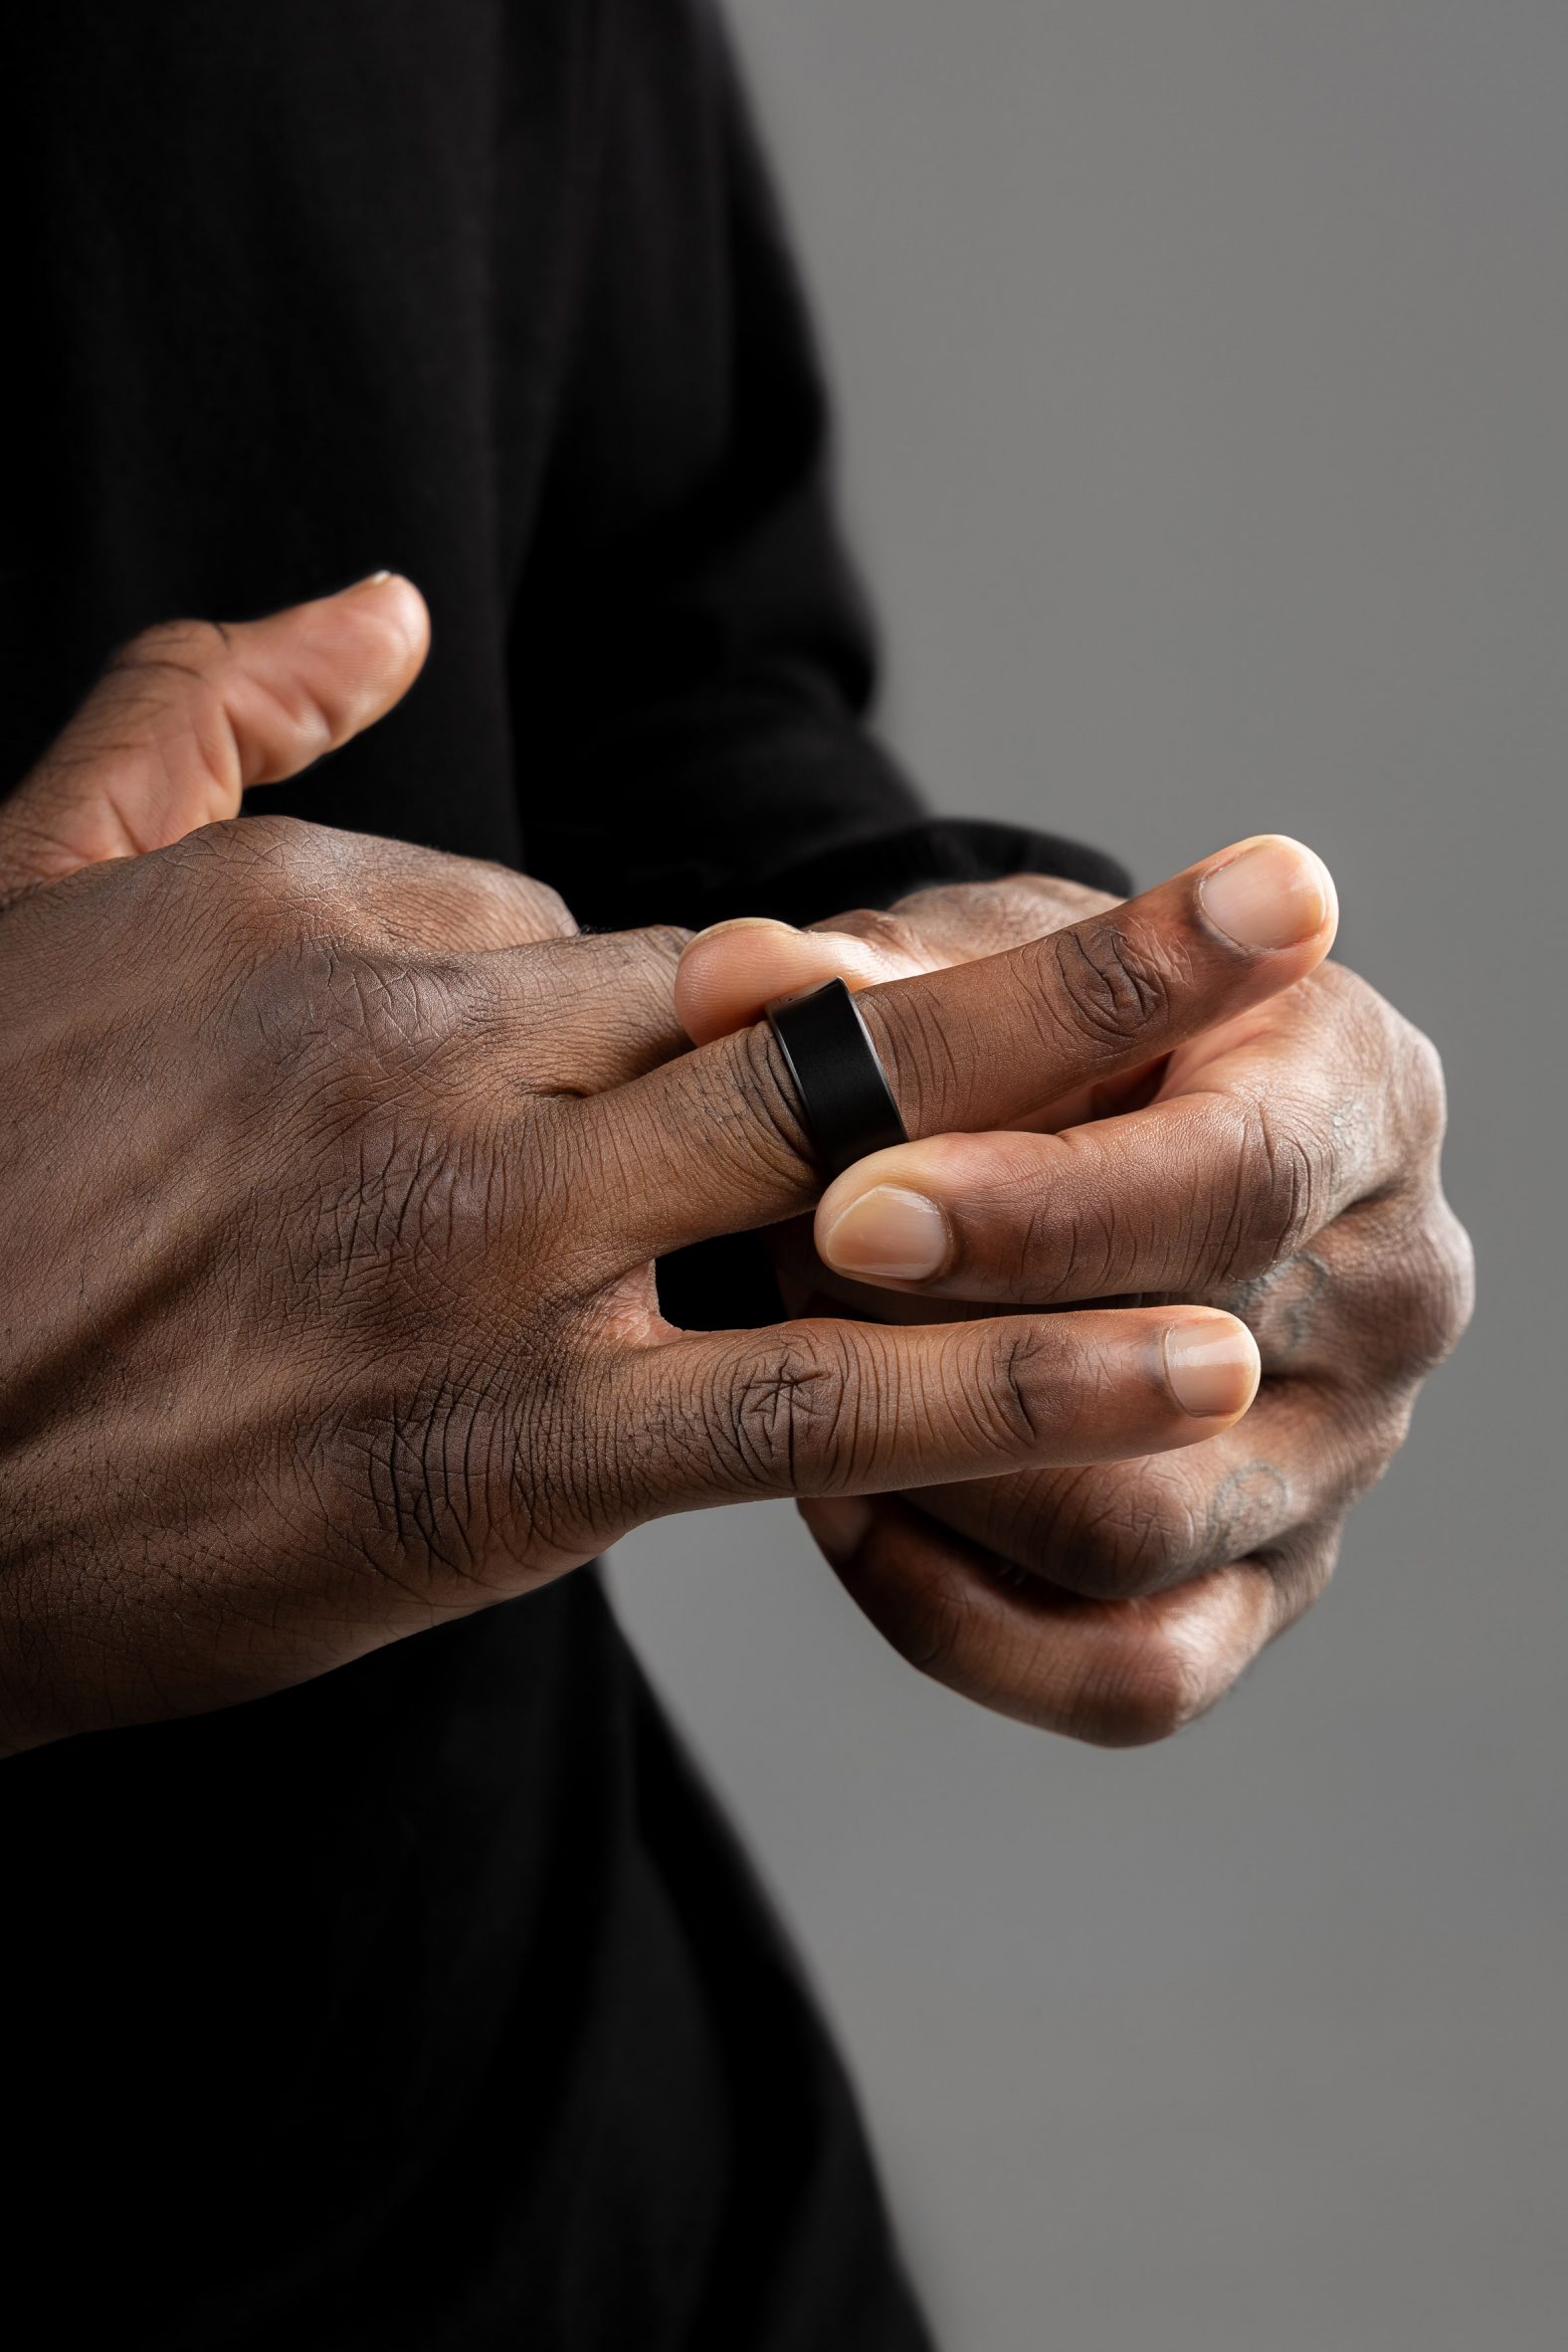 Close-up photo of a man's hands while he lifts a ring from his finger